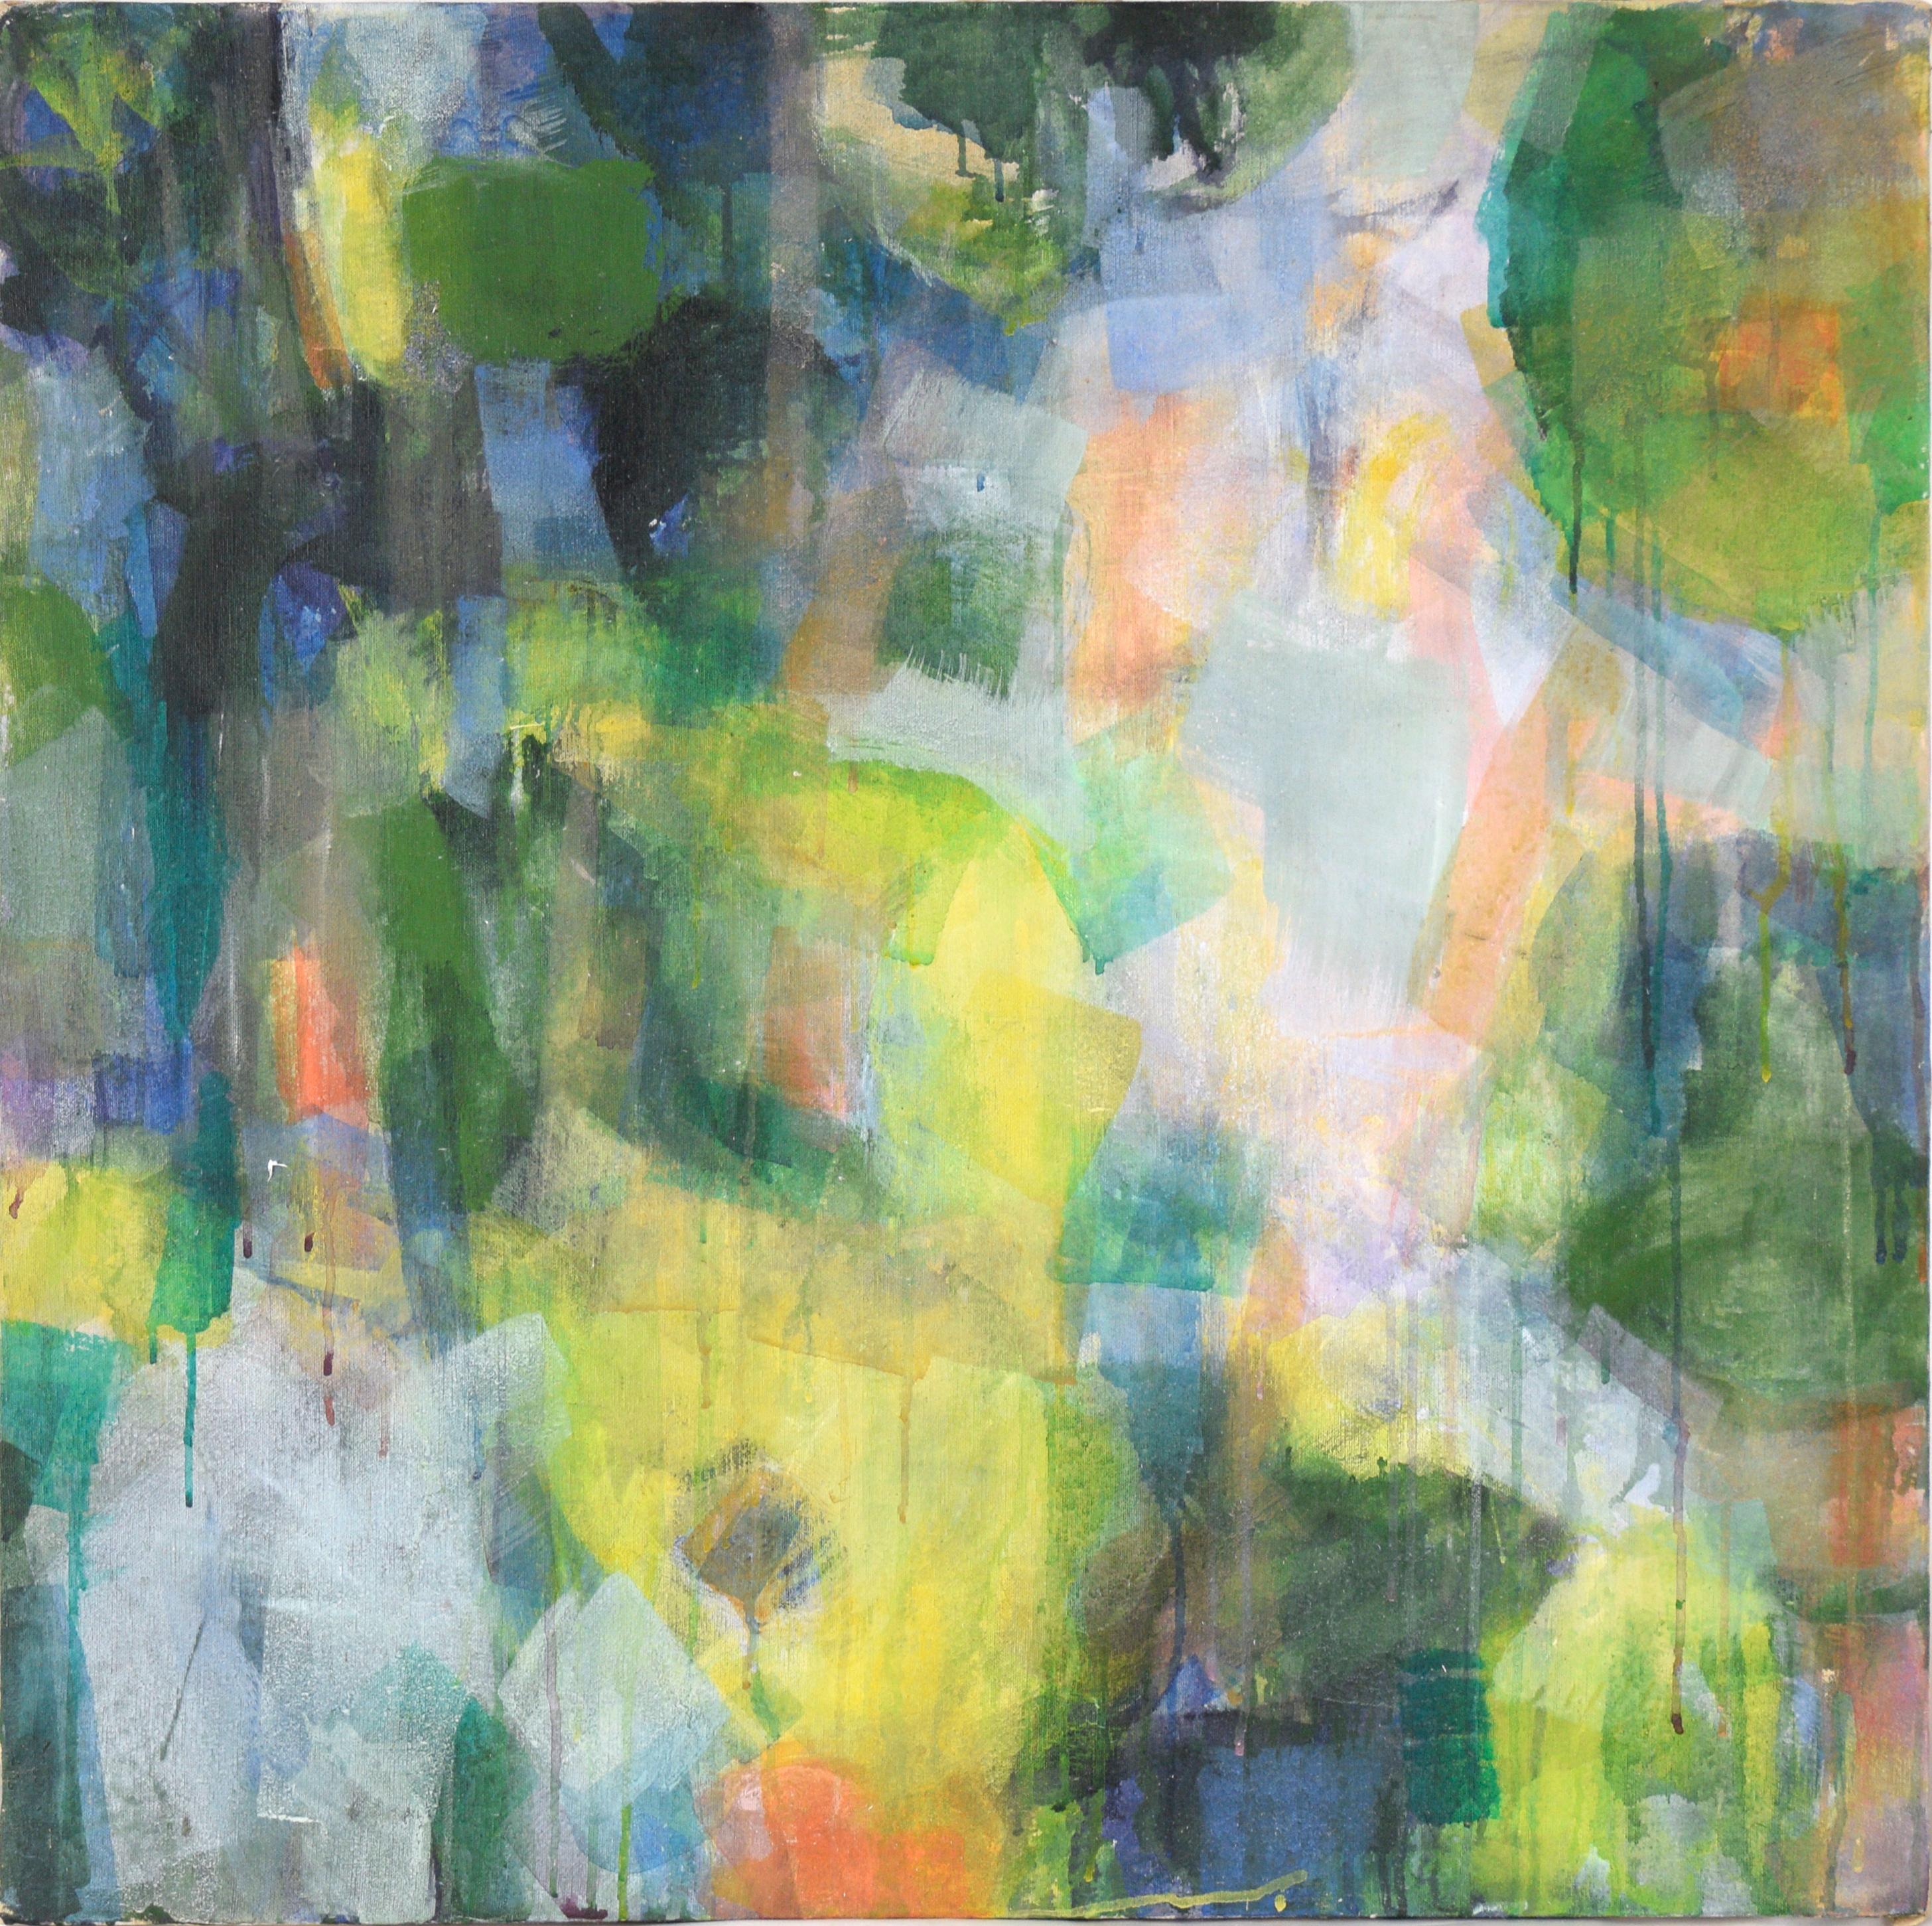 Color Field - Abstract Green and Yellow by Patricia Gren Hayes Acrylic on Canvas

Color Field abstract composition by Bay Area artist Patricia Gren Hayes (American, b. 1932). Wide brushstrokes of slightly transparent paint overlap to create a